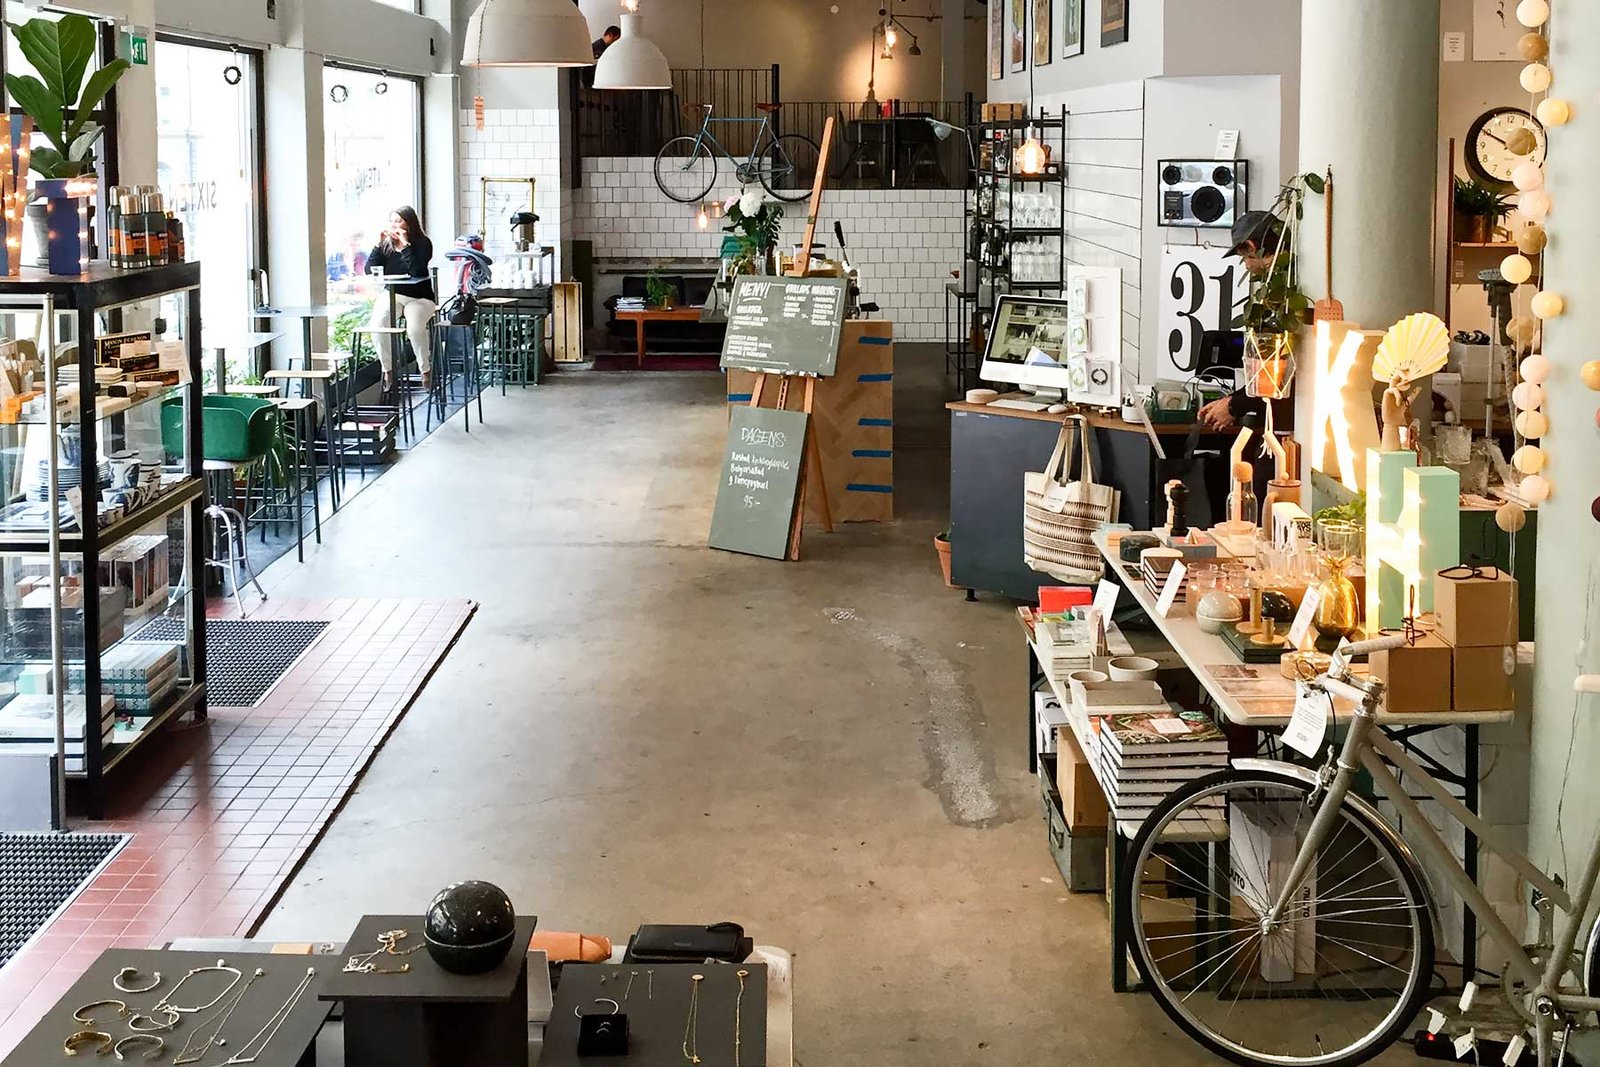 10 Food & Shopping hotspots you need to know in Stockholm - Concept Store Grandpa